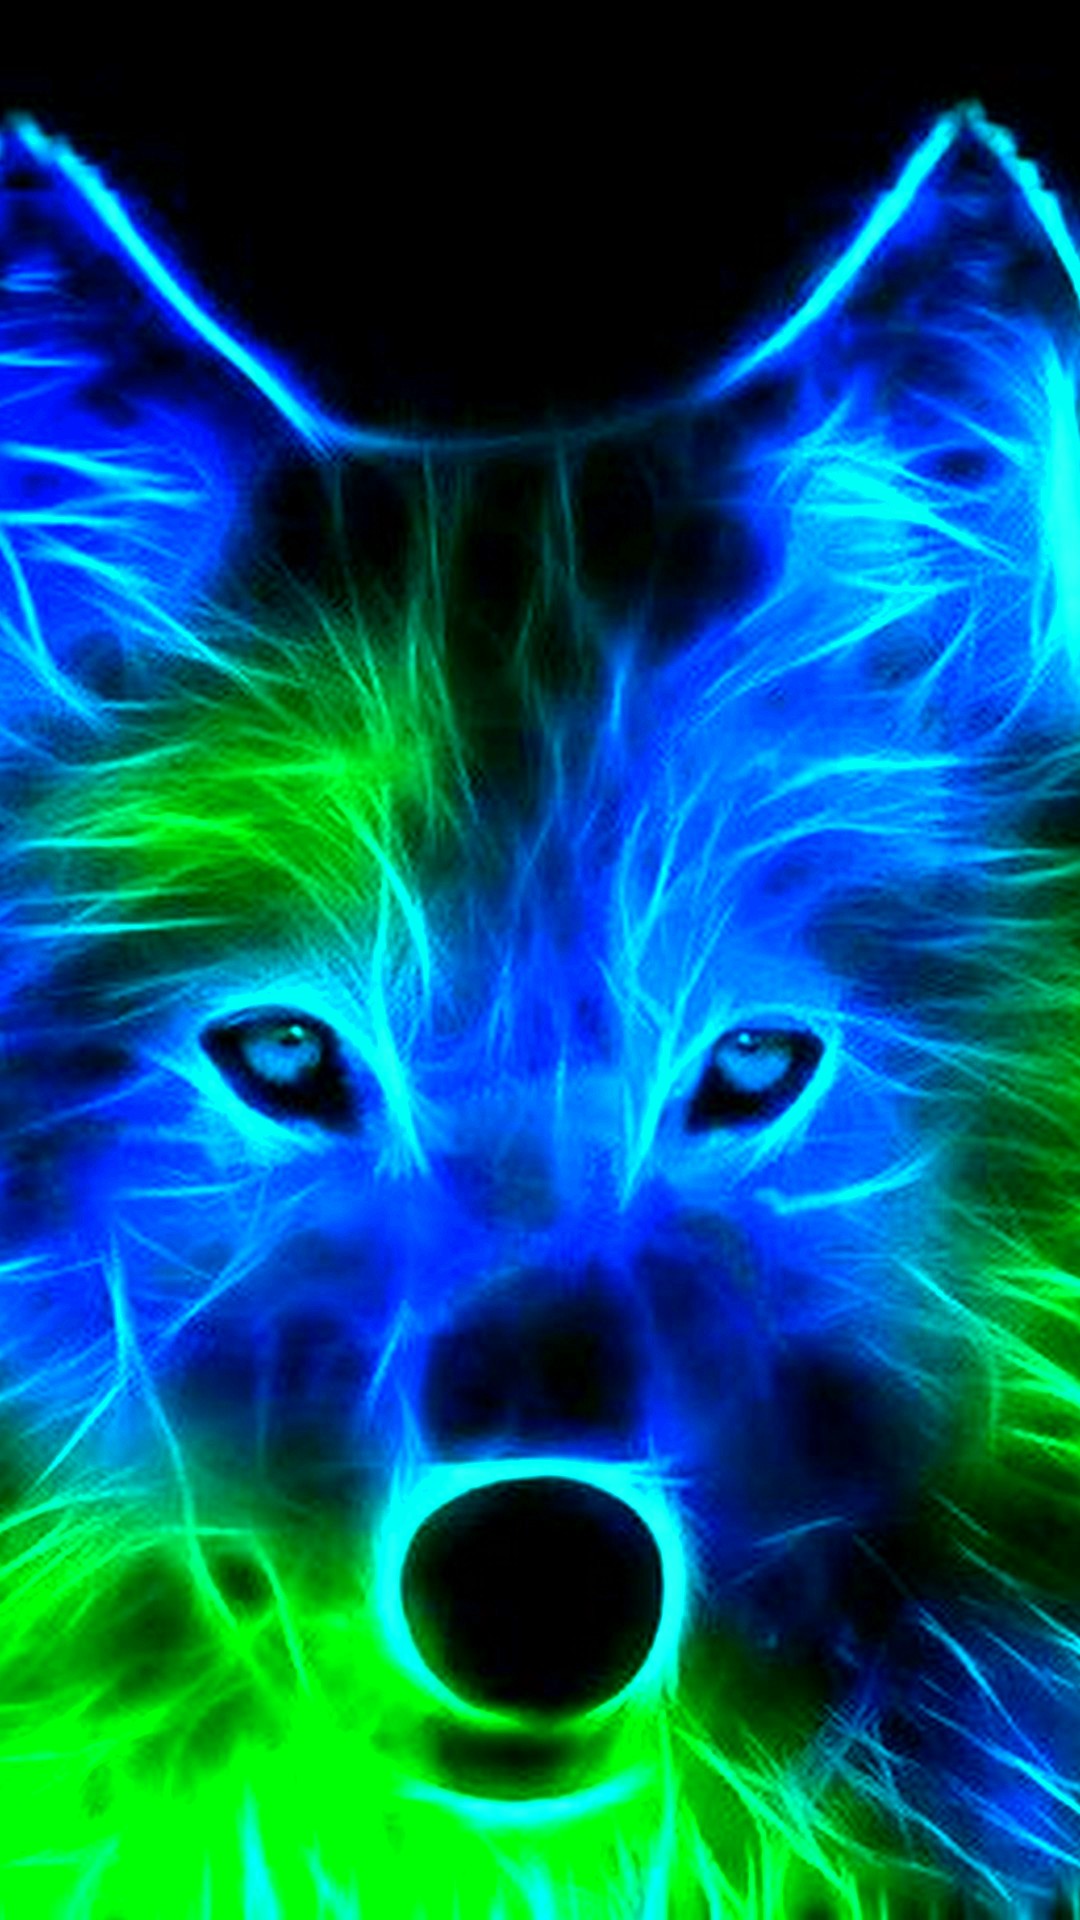 Wallpapers iPhone Cool Wolf with high-resolution 1080x1920 pixel. You can use this wallpaper for your iPhone 5, 6, 7, 8, X, XS, XR backgrounds, Mobile Screensaver, or iPad Lock Screen